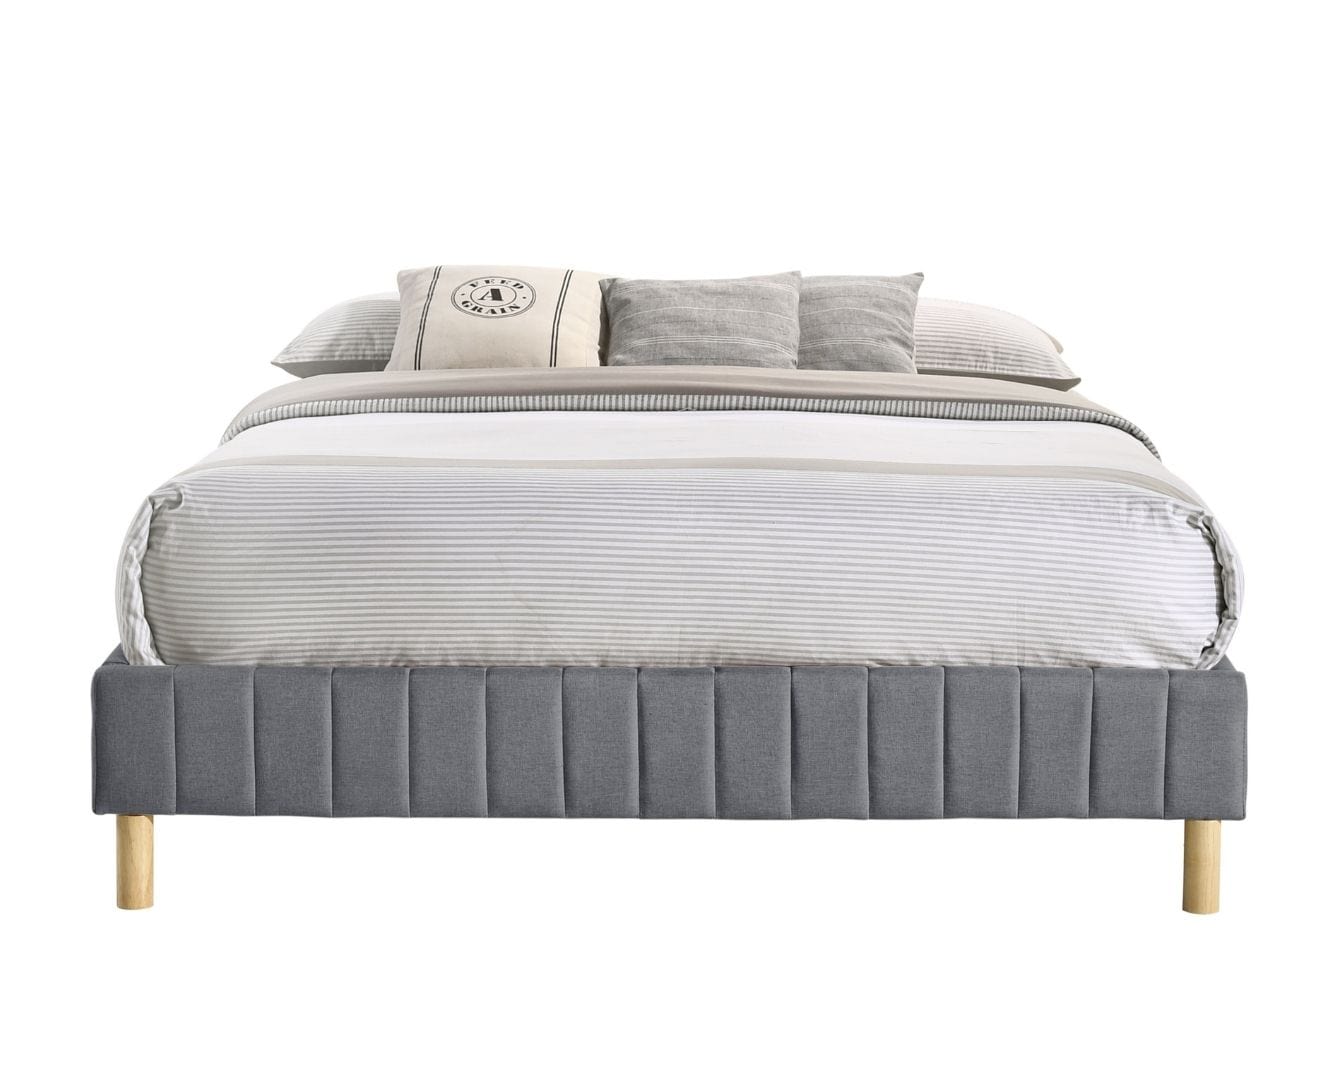 Aries Contemporary Platform Bed Base Fabric Frame with Timber Slat King in Light Grey - Newstart Furniture